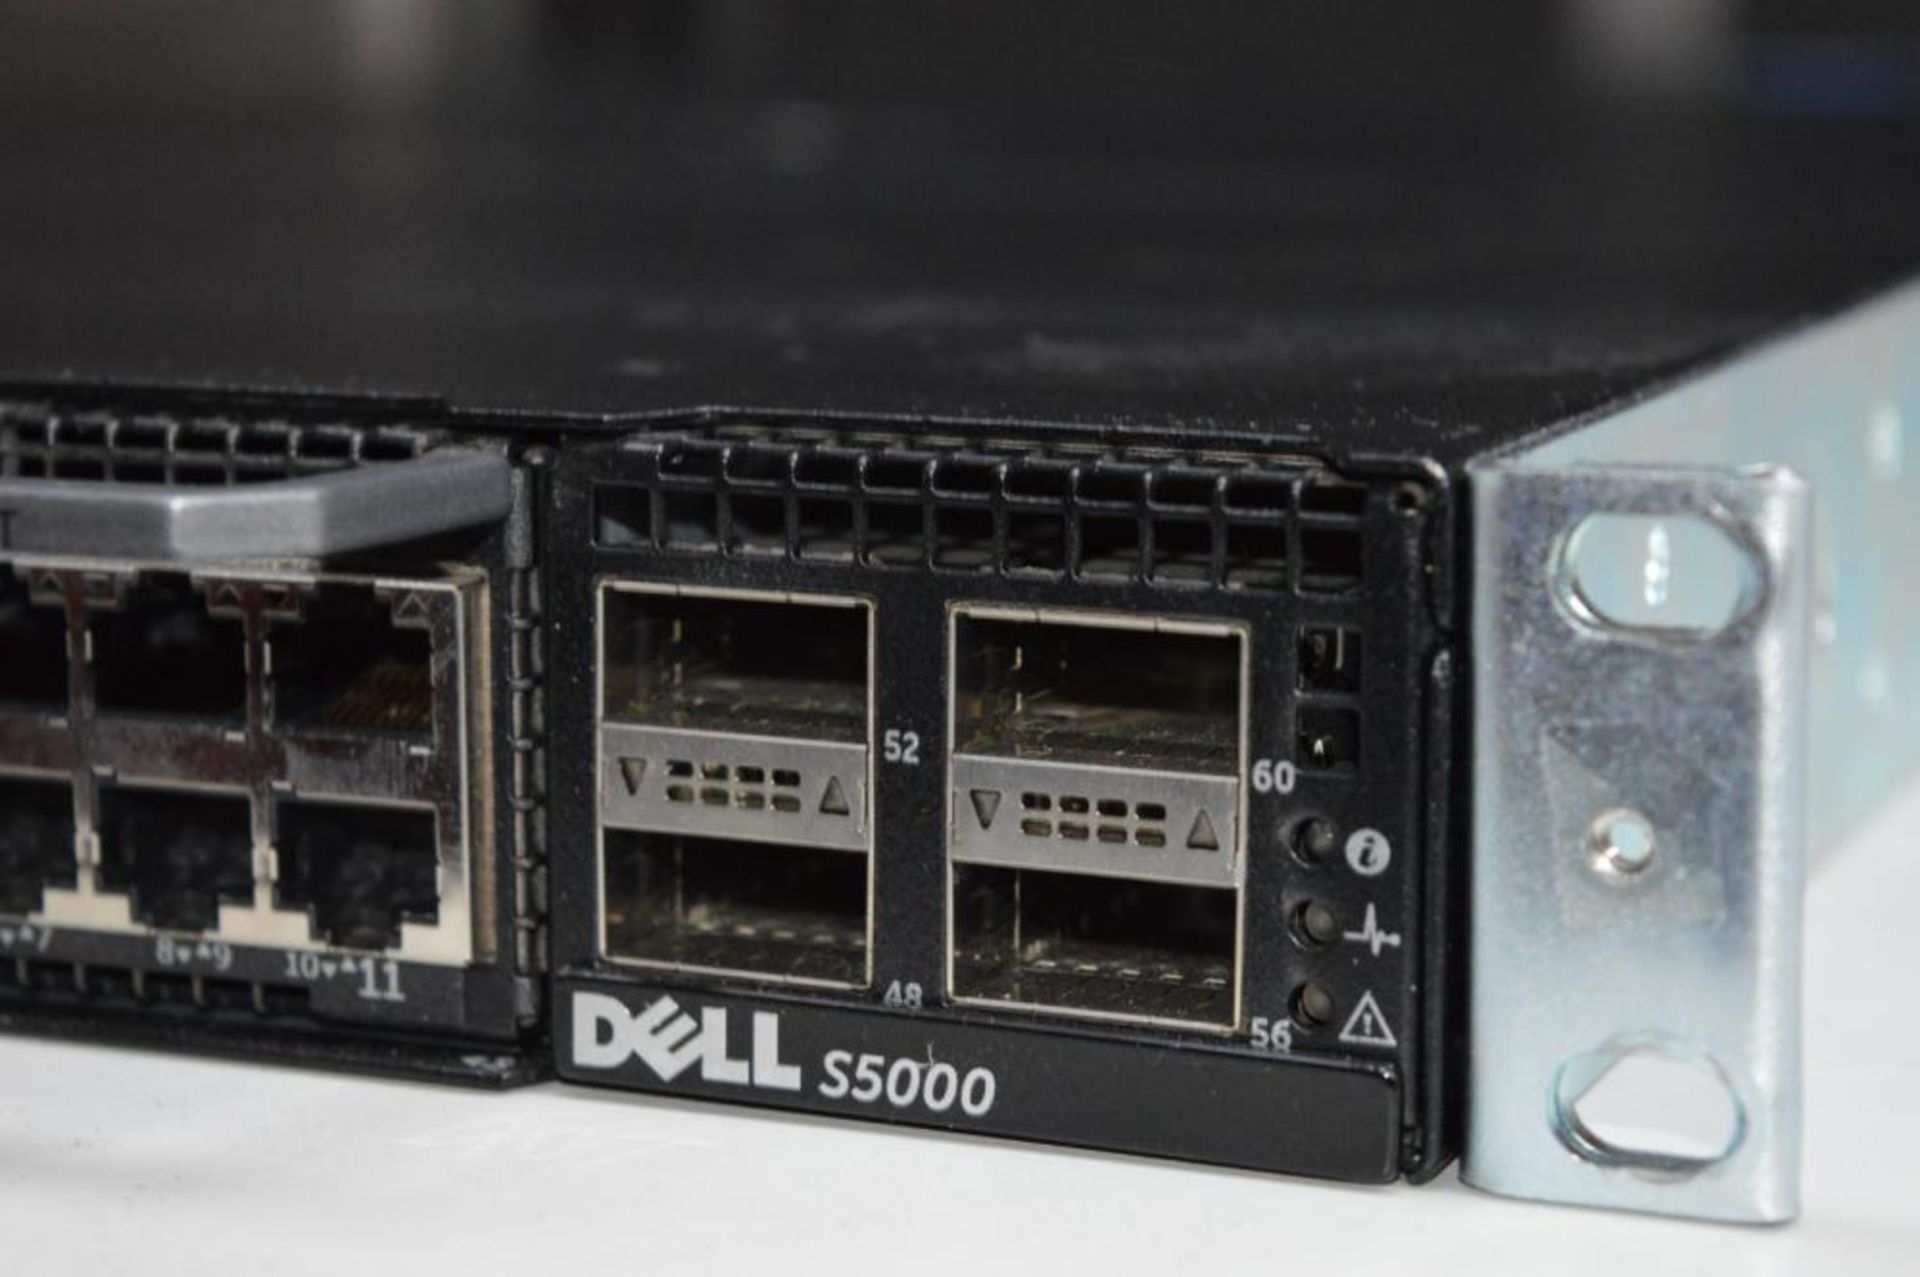 1 x Dell S5000 Modular 1U Storage Switch With 4 x 12xETH10-T Modules & 2 x 750w Power Supplies - Image 7 of 8